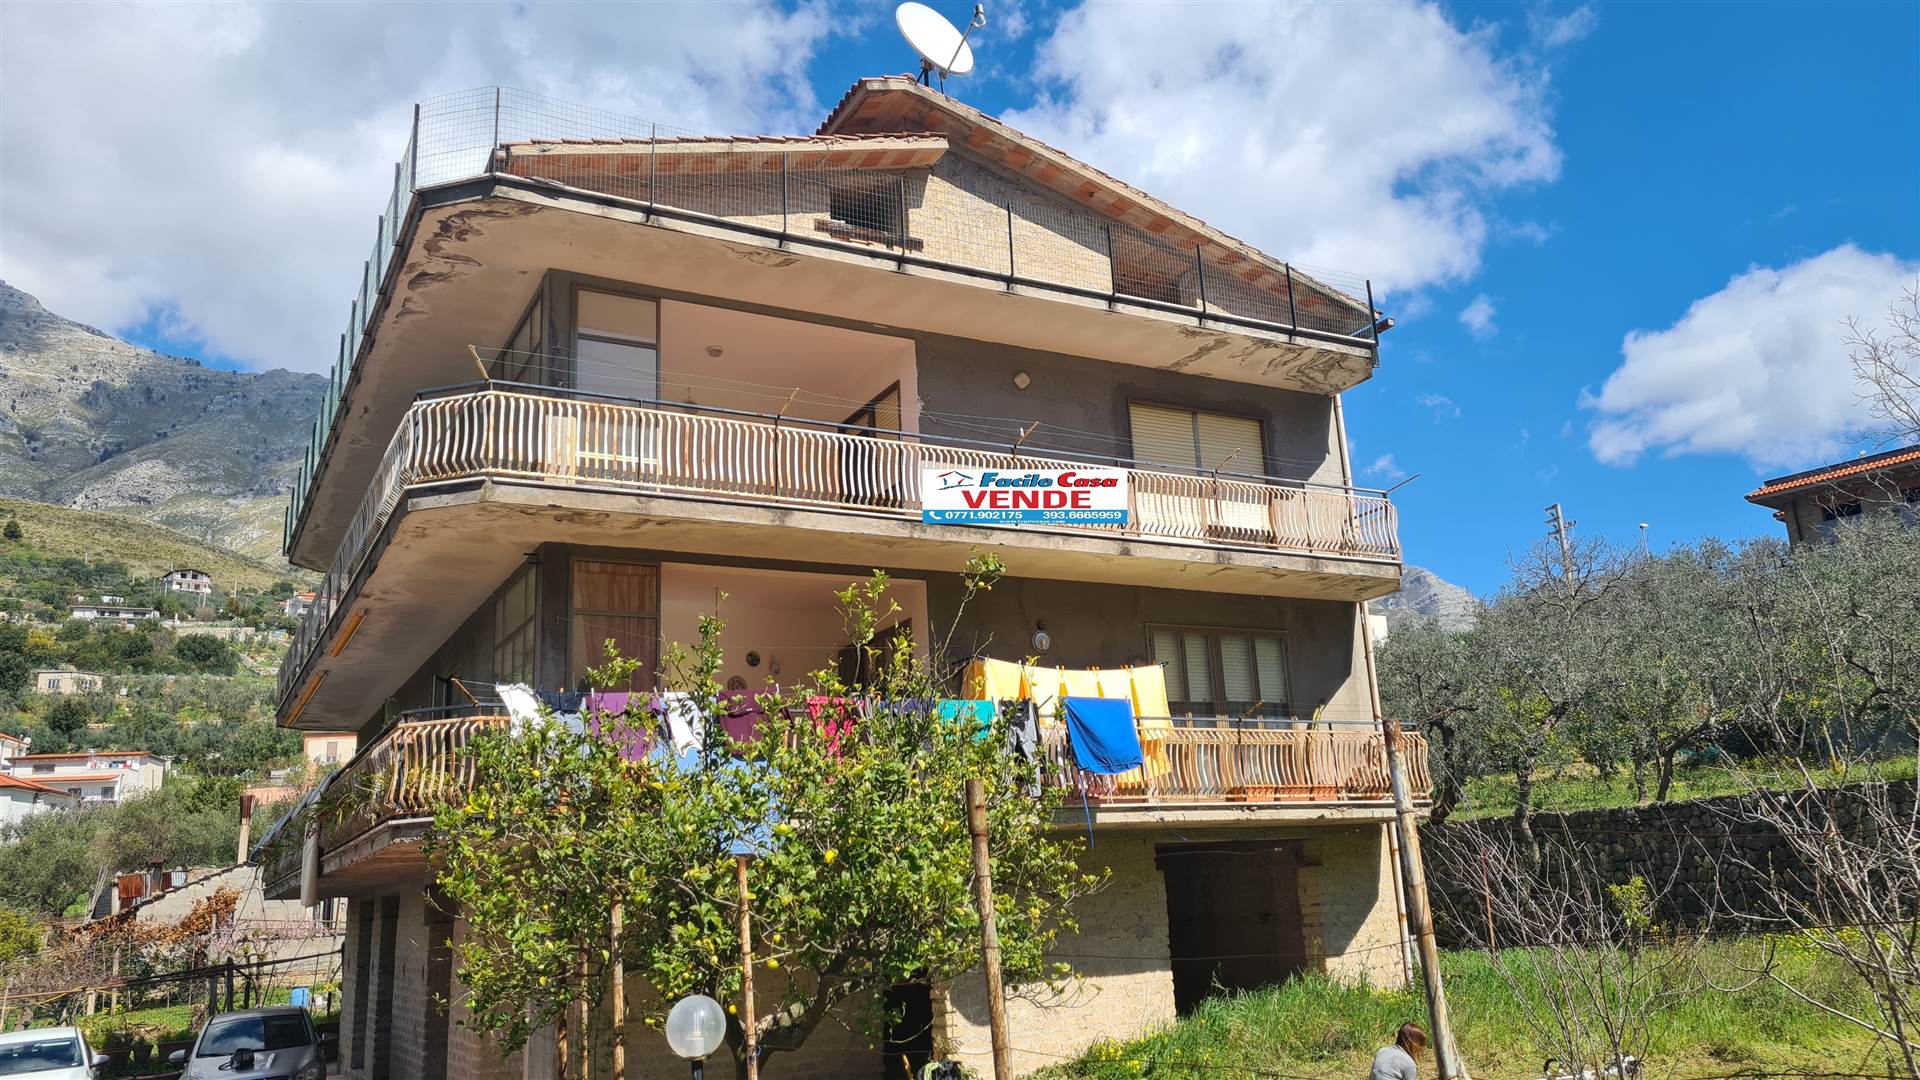 TRIVIO, FORMIA, Apartment for sale of 172 Sq. mt., Habitable, Heating Individual heating system, Energetic class: G, placed at 2° on 3, composed by: 